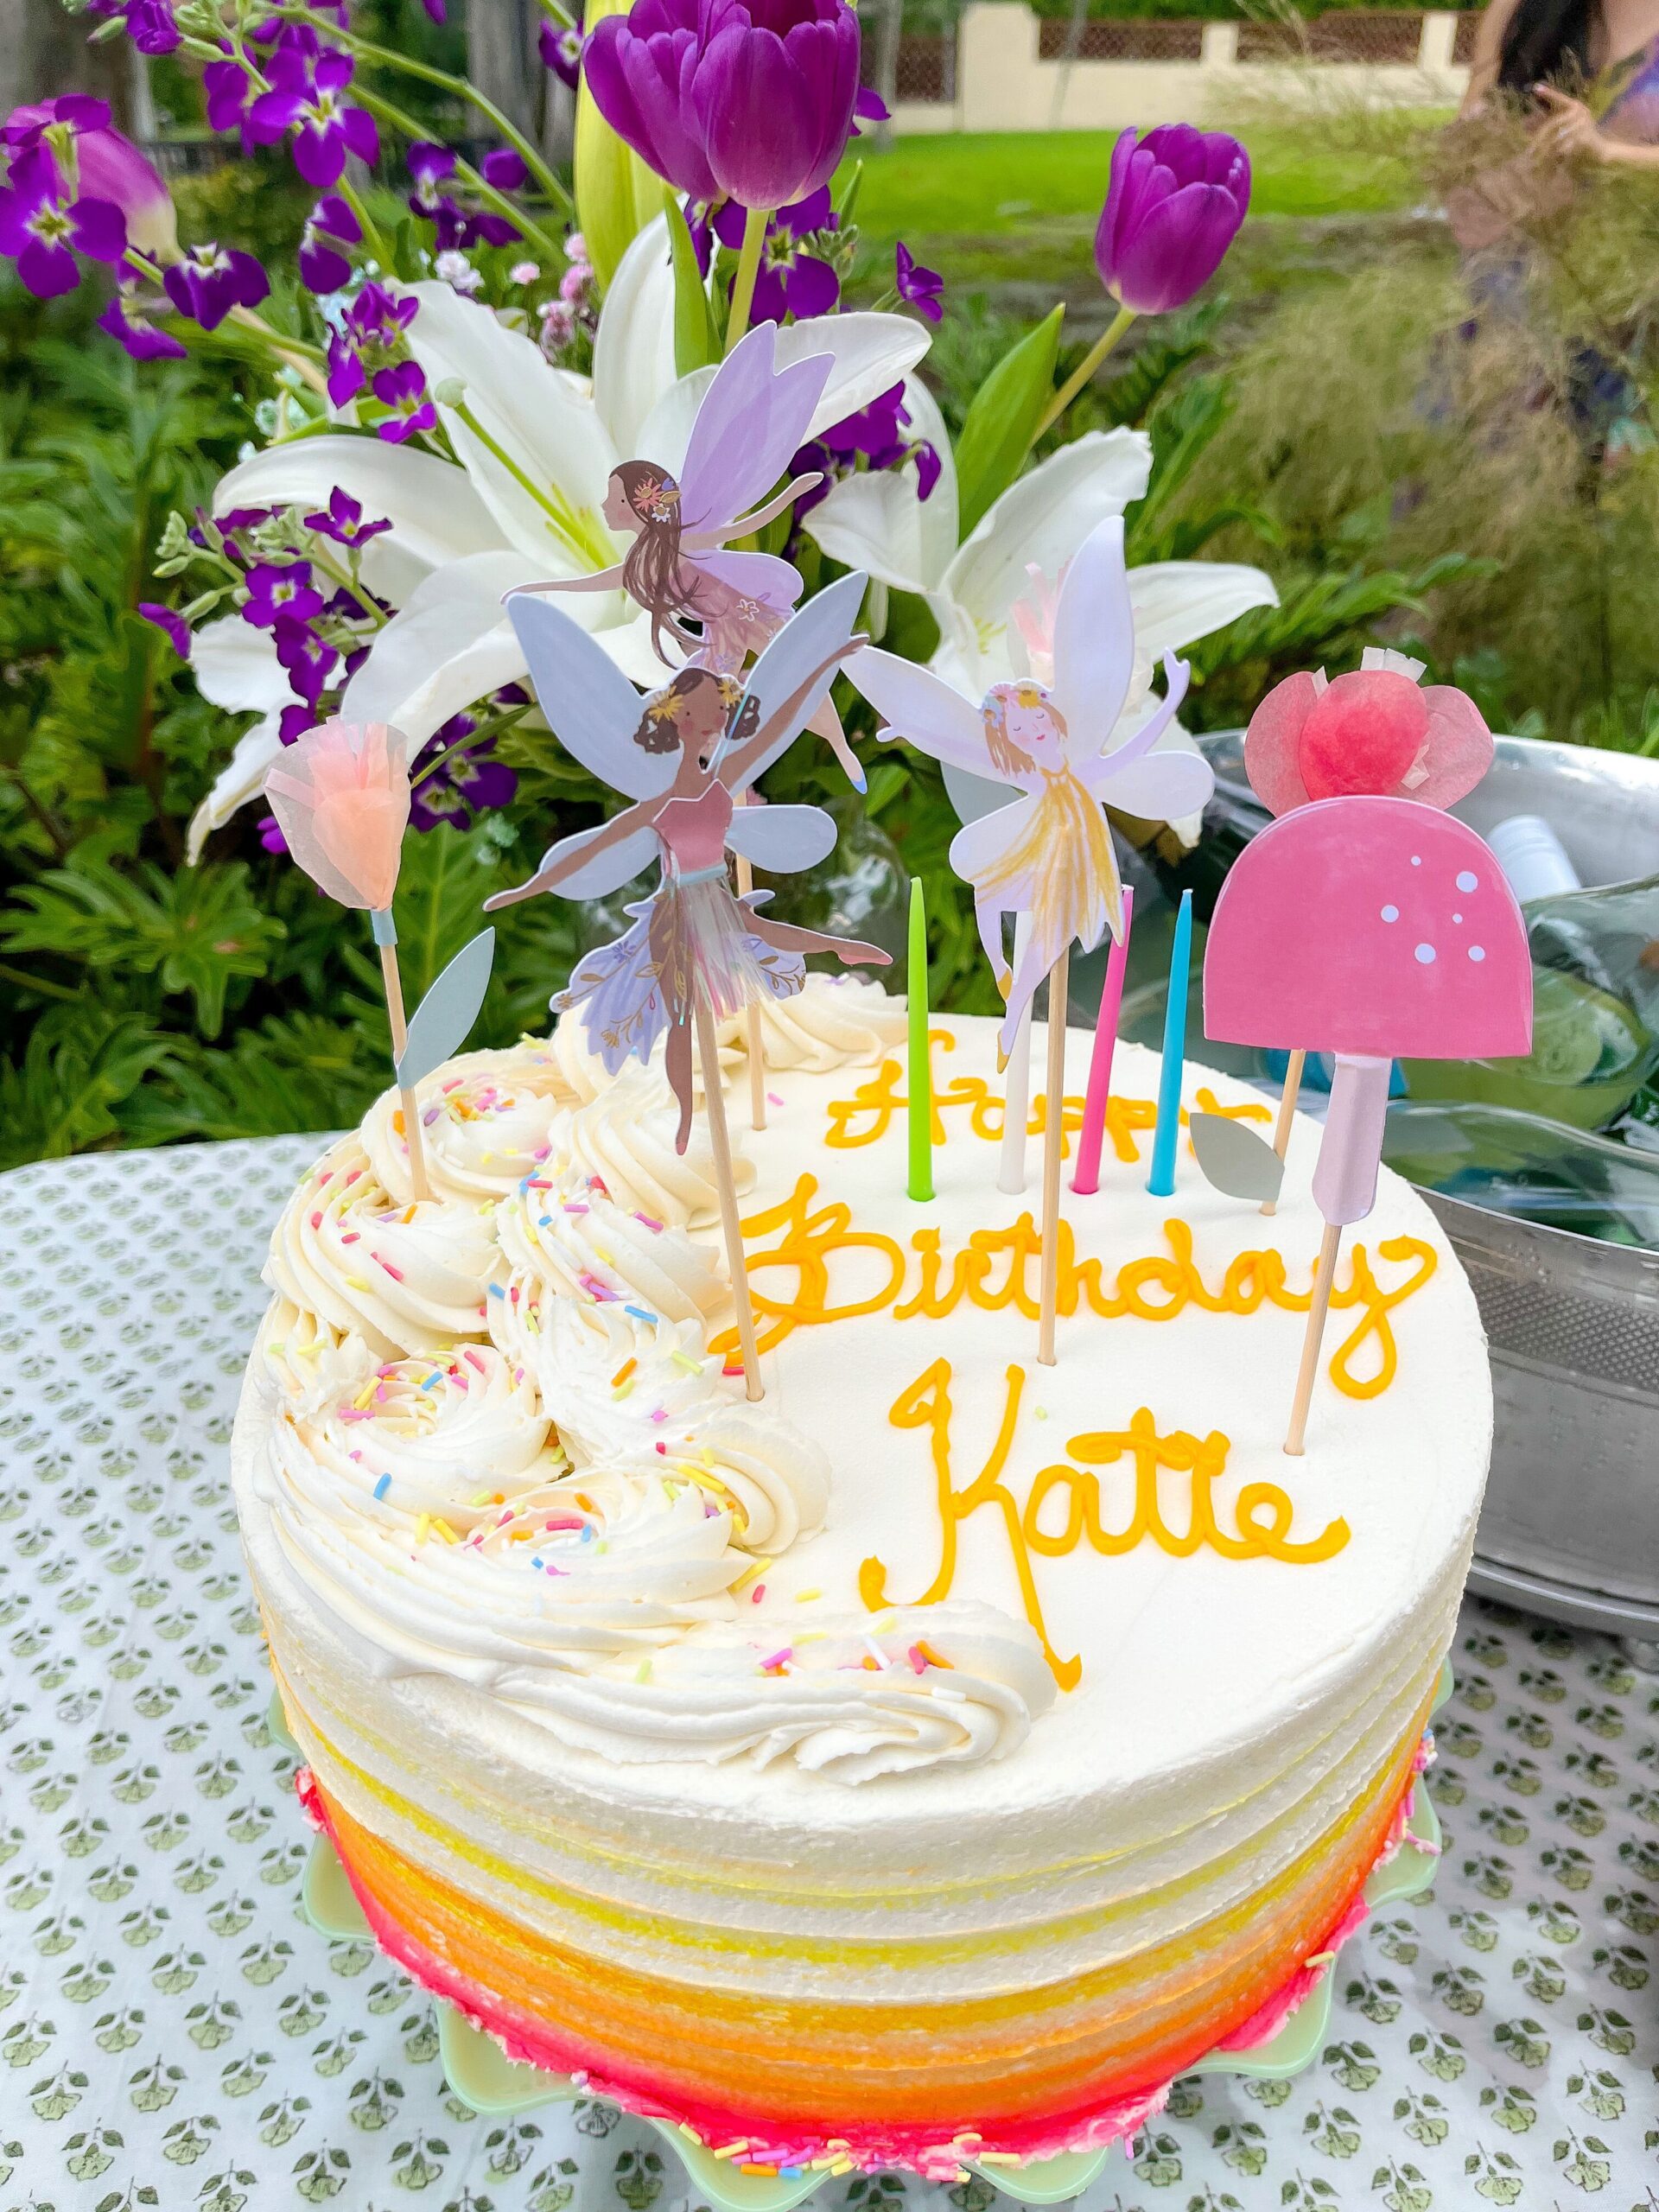 Haute Cakes Pastry Shop | Artisan Cakes For The Sweetest of Occasions